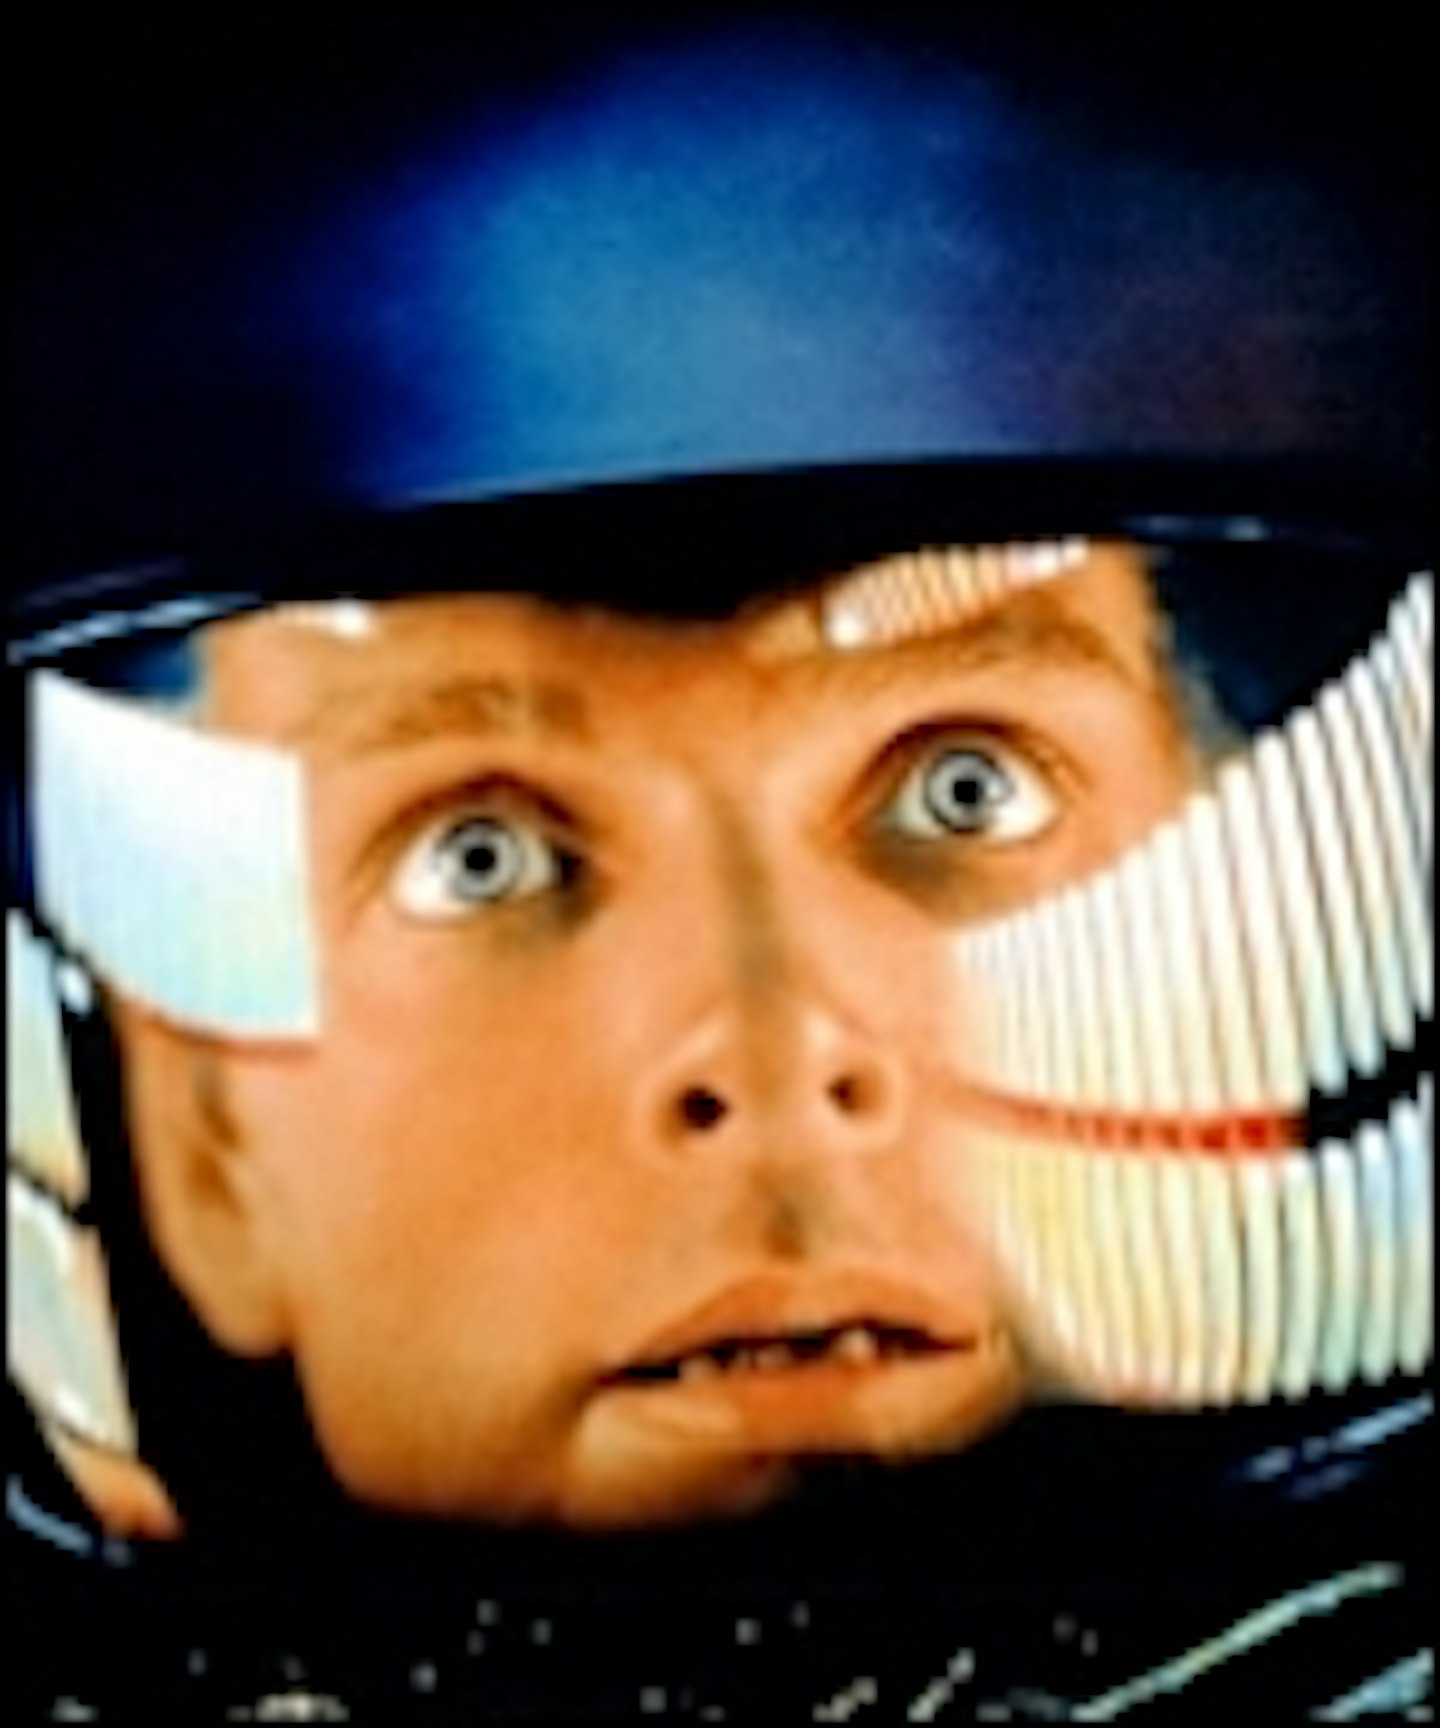 Re-Release Trailer For 2001: A Space Odyssey